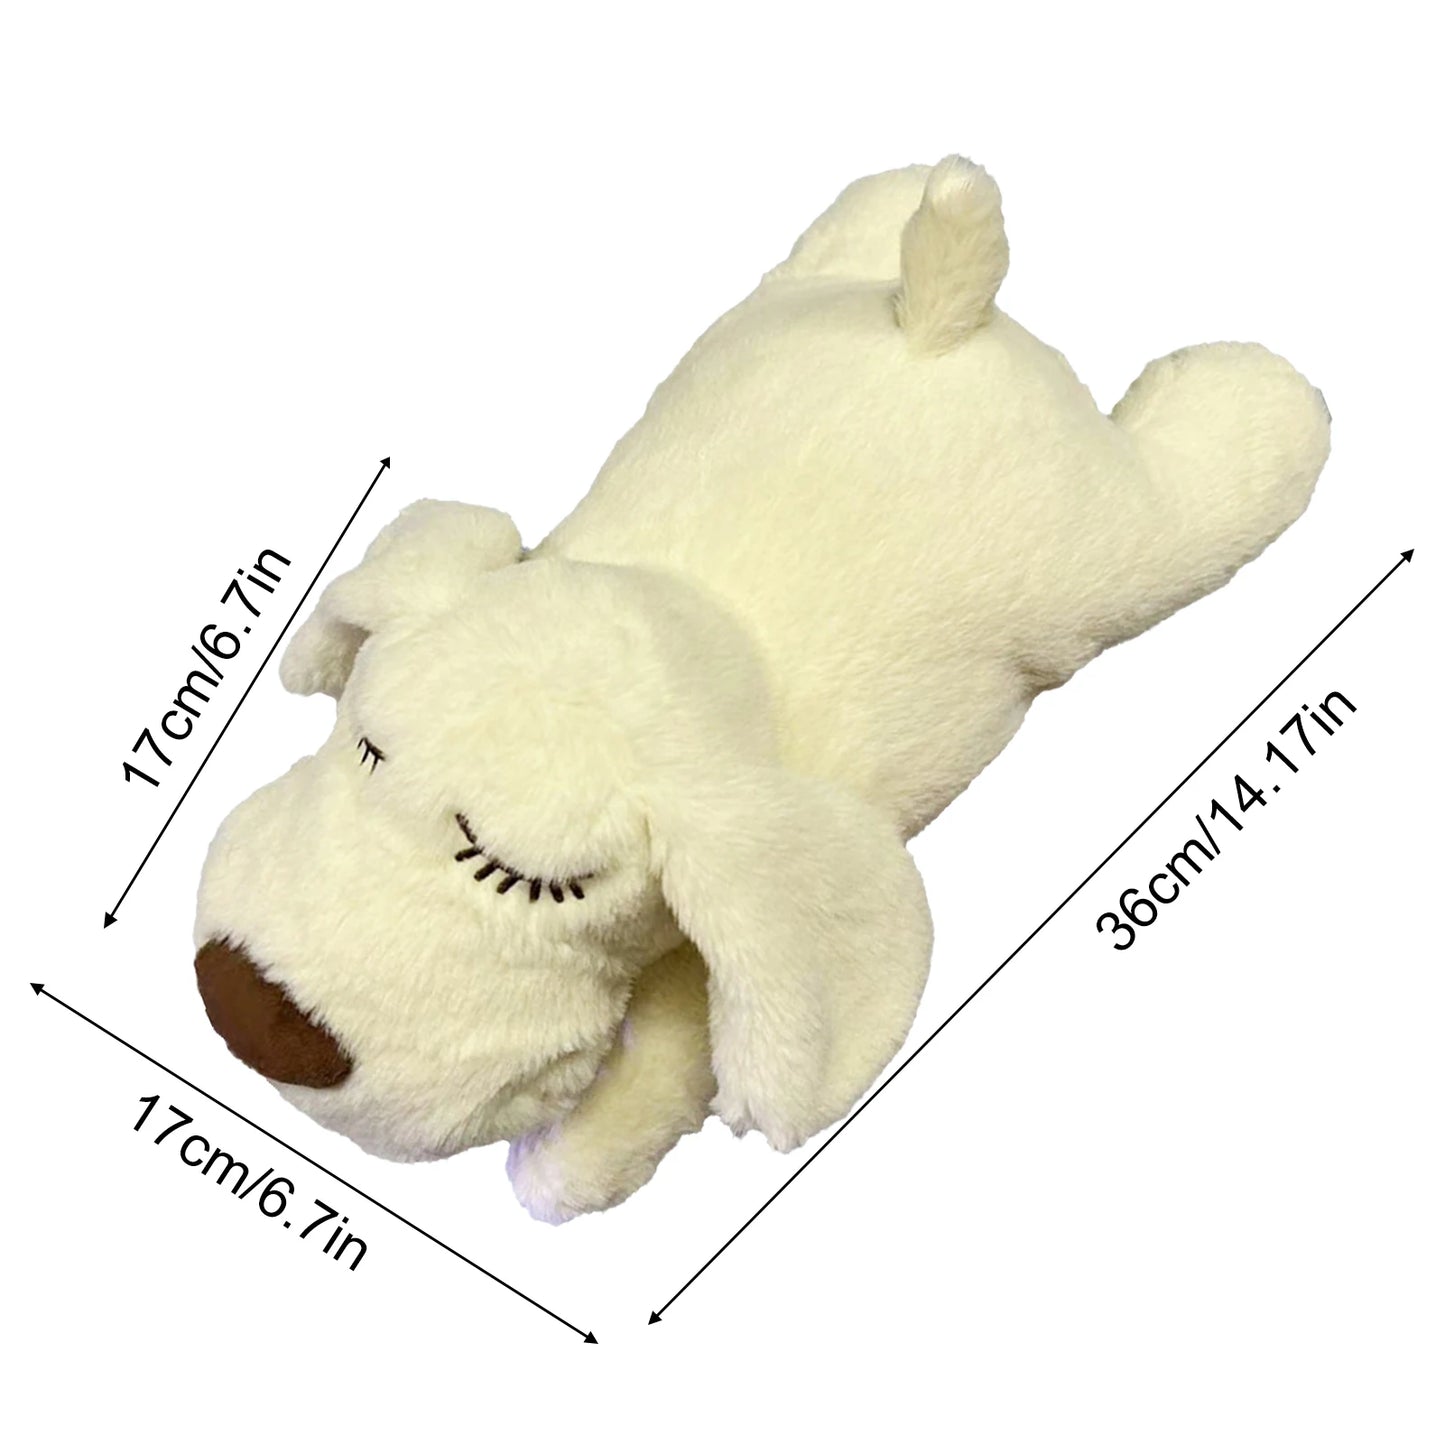 Heartbeat Comfort Plush Dog Toy | Soft Fabric Loneliness Relief Companion | Suitable for New Pets & Puppies | Two Modes Heartbeat Simulation ShopOnlyDeal